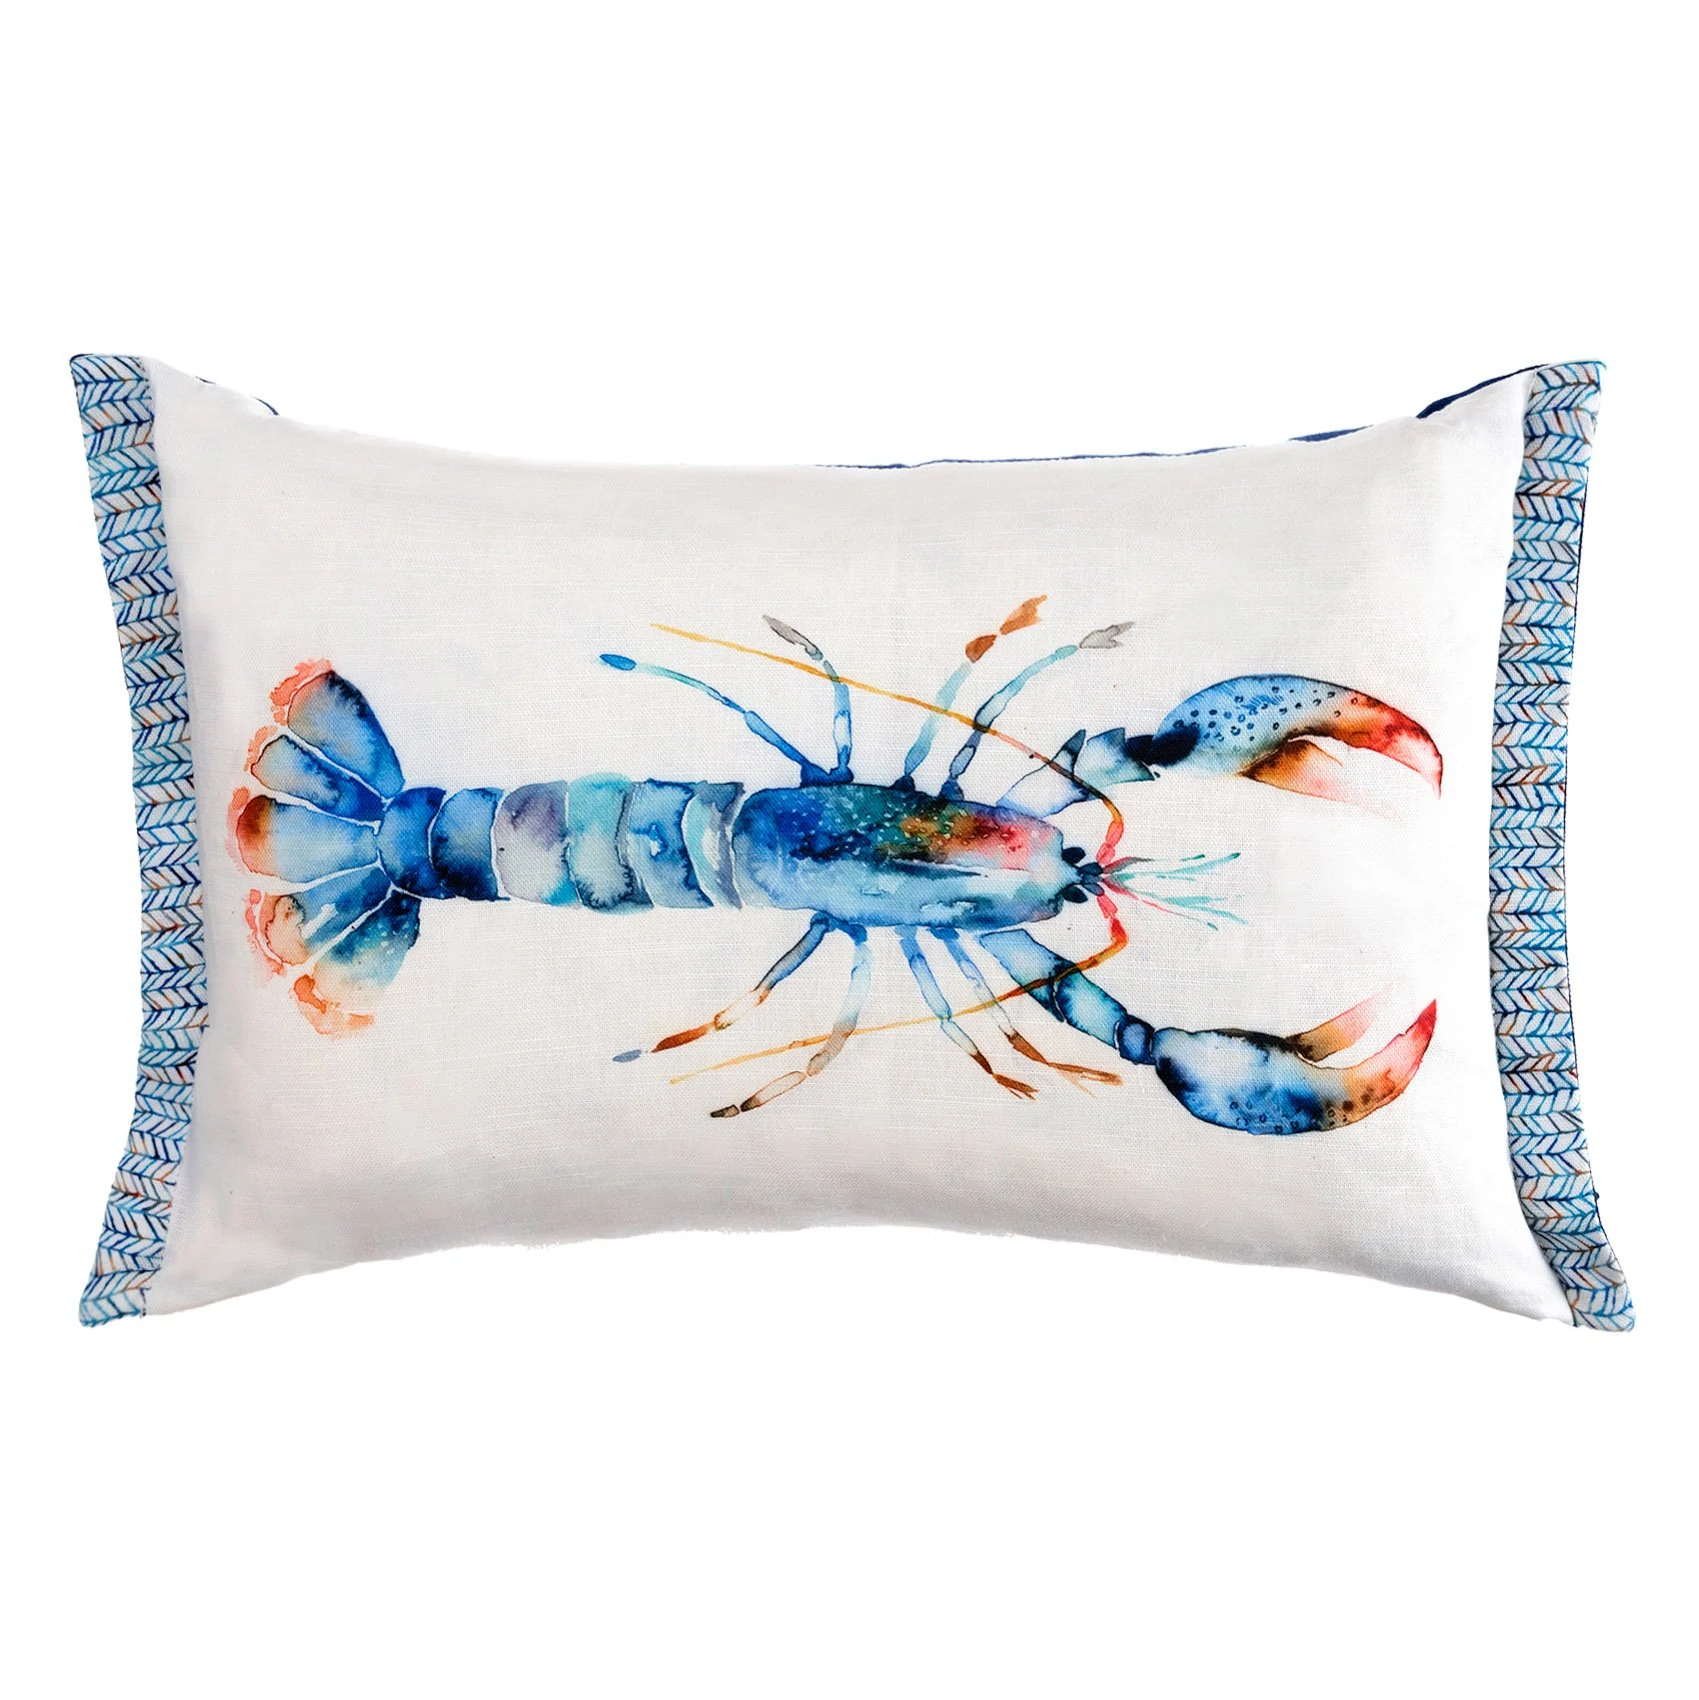 Lobster Cobalt Cushion for sale - Woodcock and Cavendish